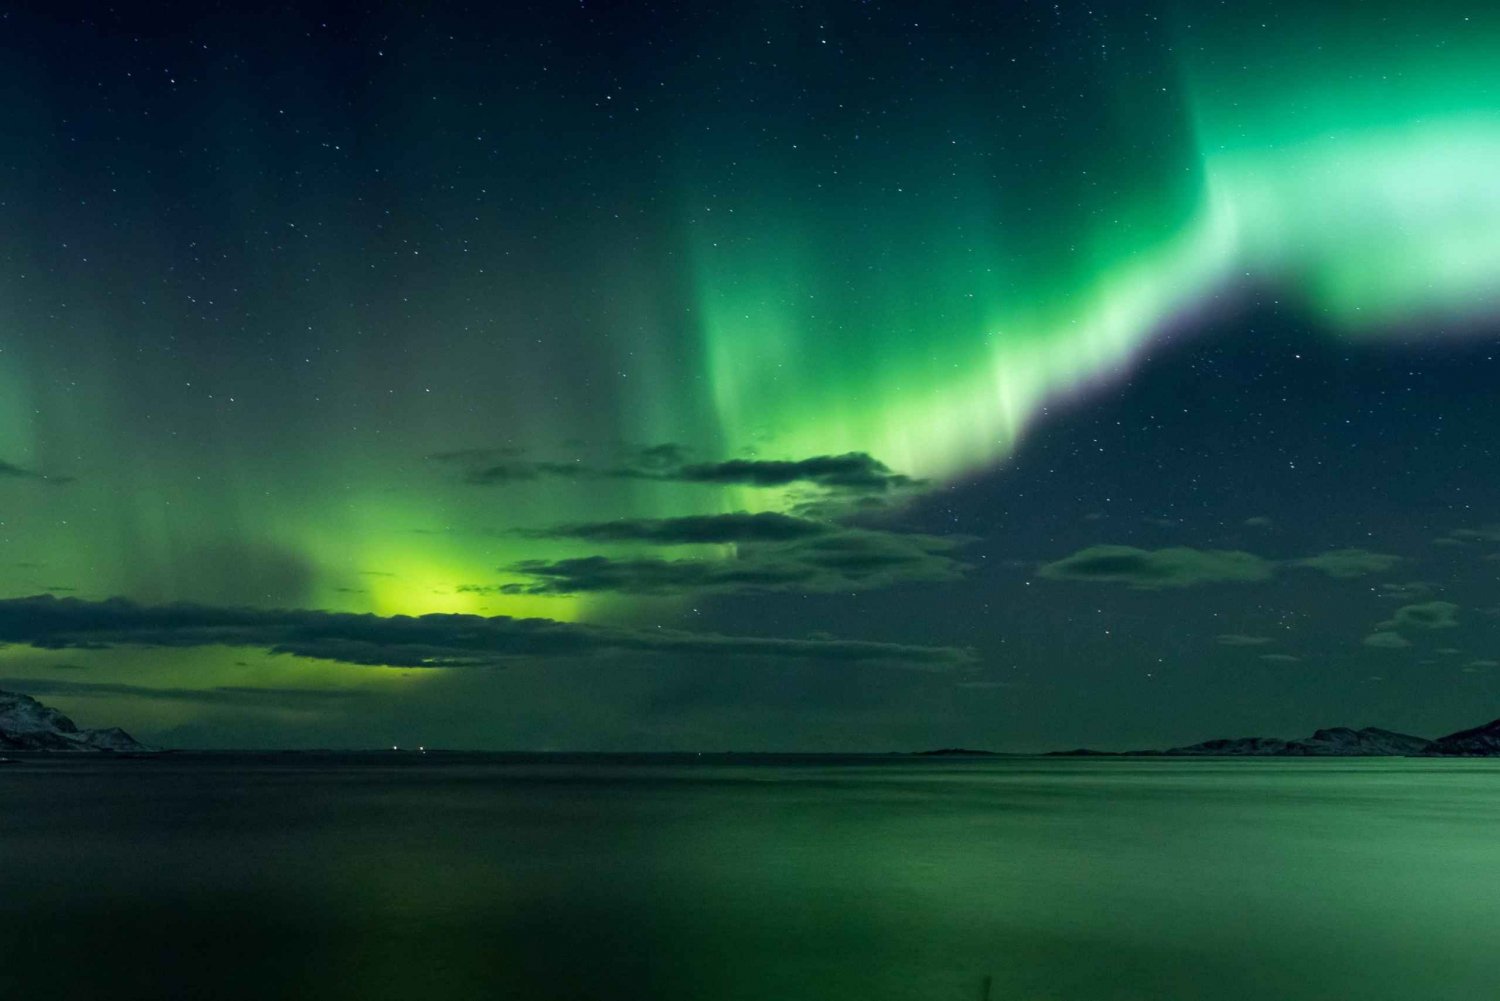 Reykjavik: Magical Northern Lights Tour with Hot Chocolate